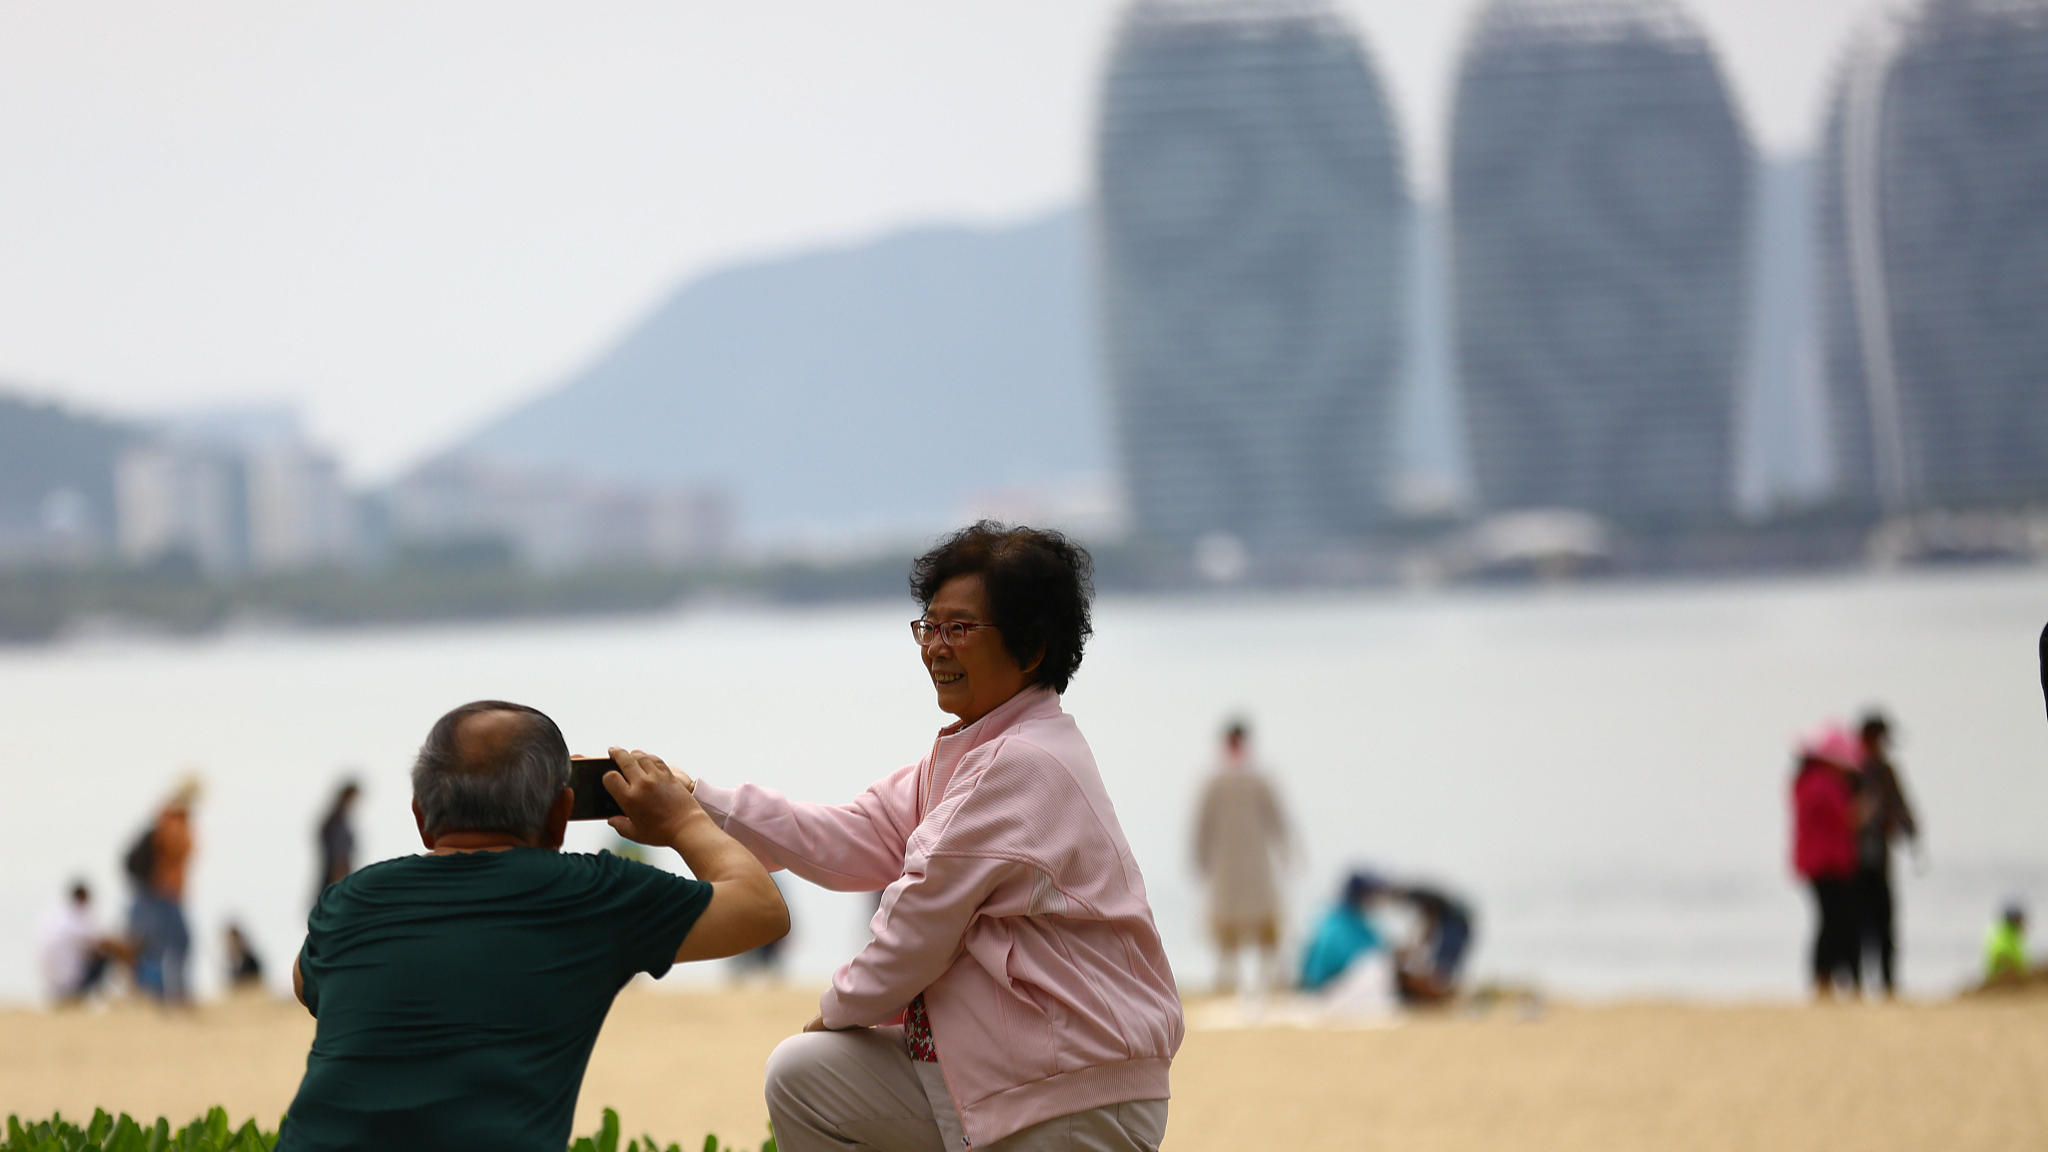 Seniors enjoy leisurely moments and take photos on the beach of Sanya Bay in South China's Hainan Province. /CFP